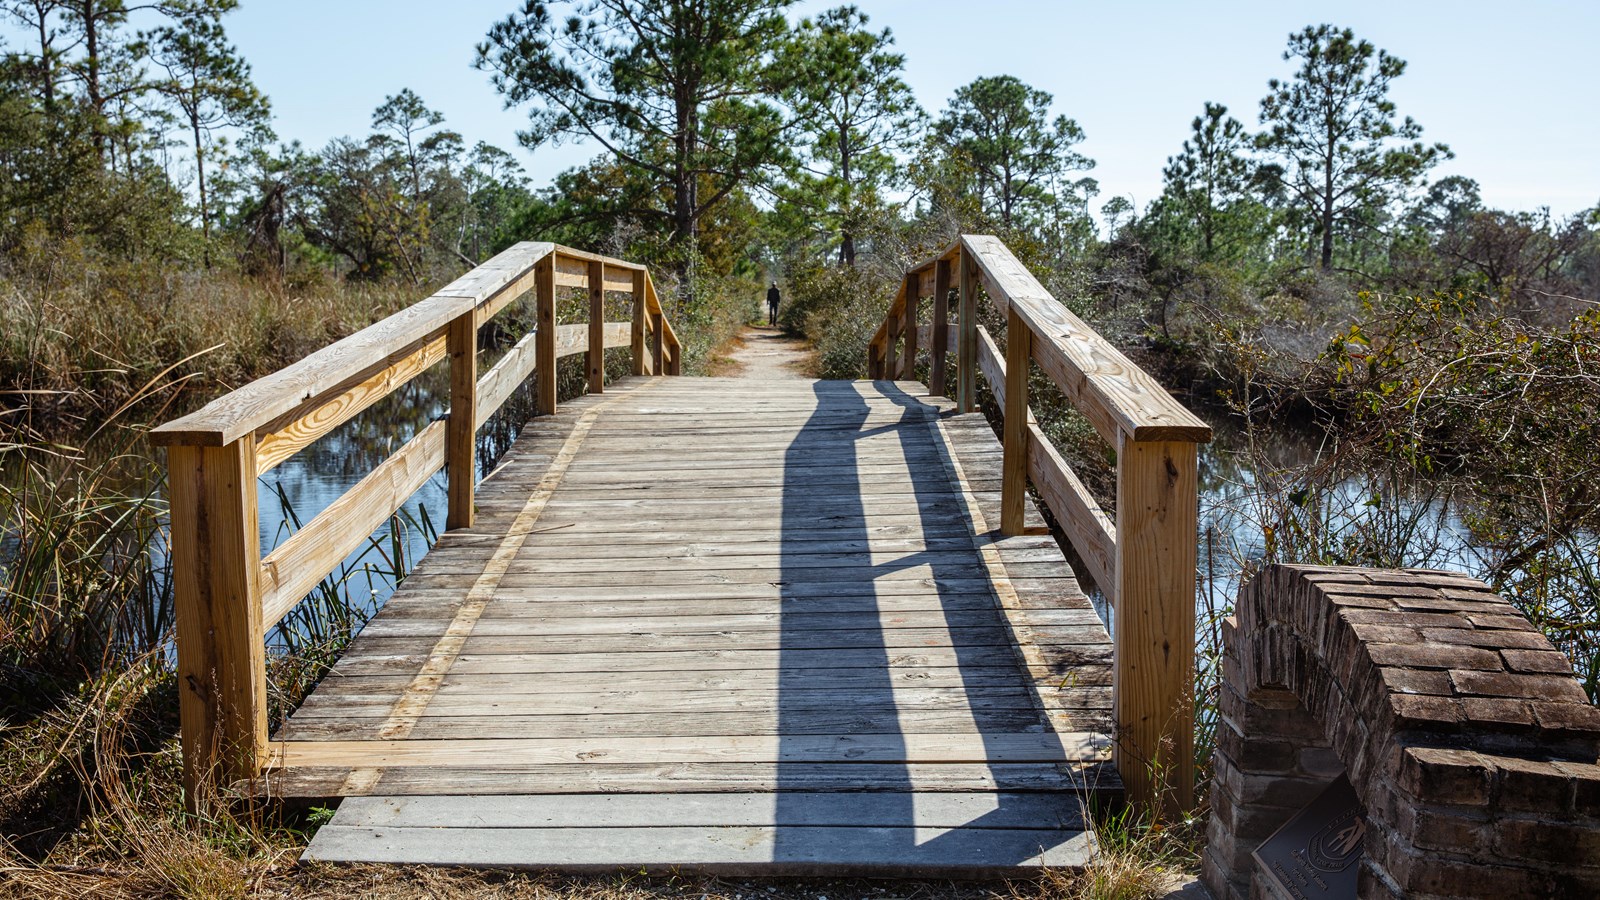 A wooden bridge arches over and turns into a trail that continues on into the forest.